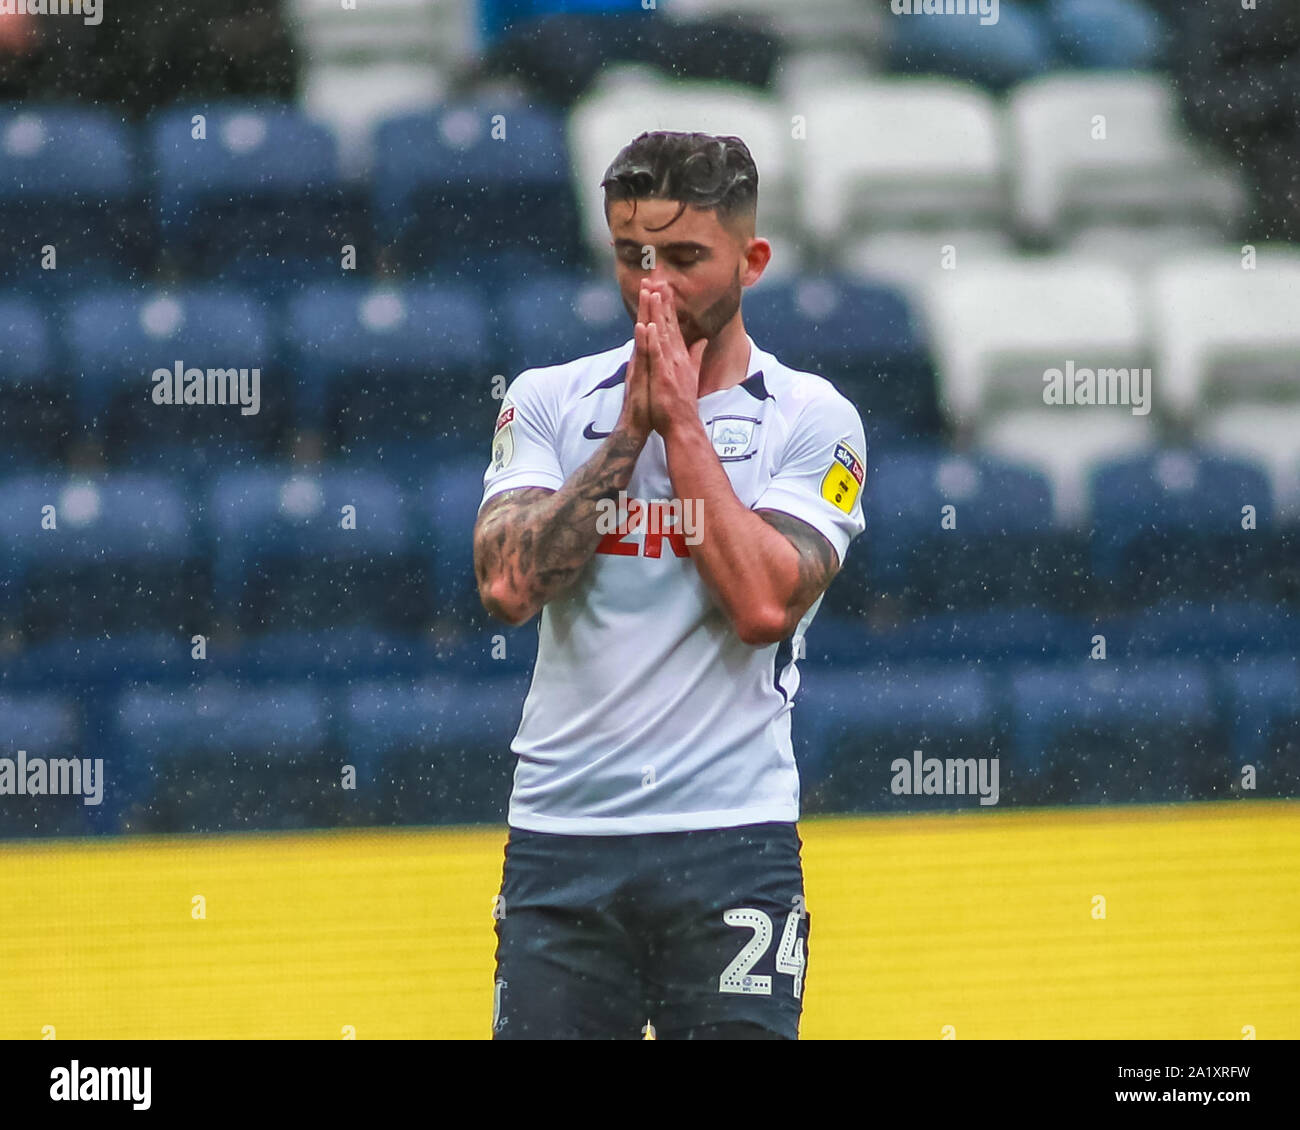 28th September 2019, Deepdale, Preston, England; Sky Bet Championship, Preston North End v Bristol City : Sean Maguire (24) of Preston North End dissappointed after his miss Credit: Craig Milner/News Images Stock Photo